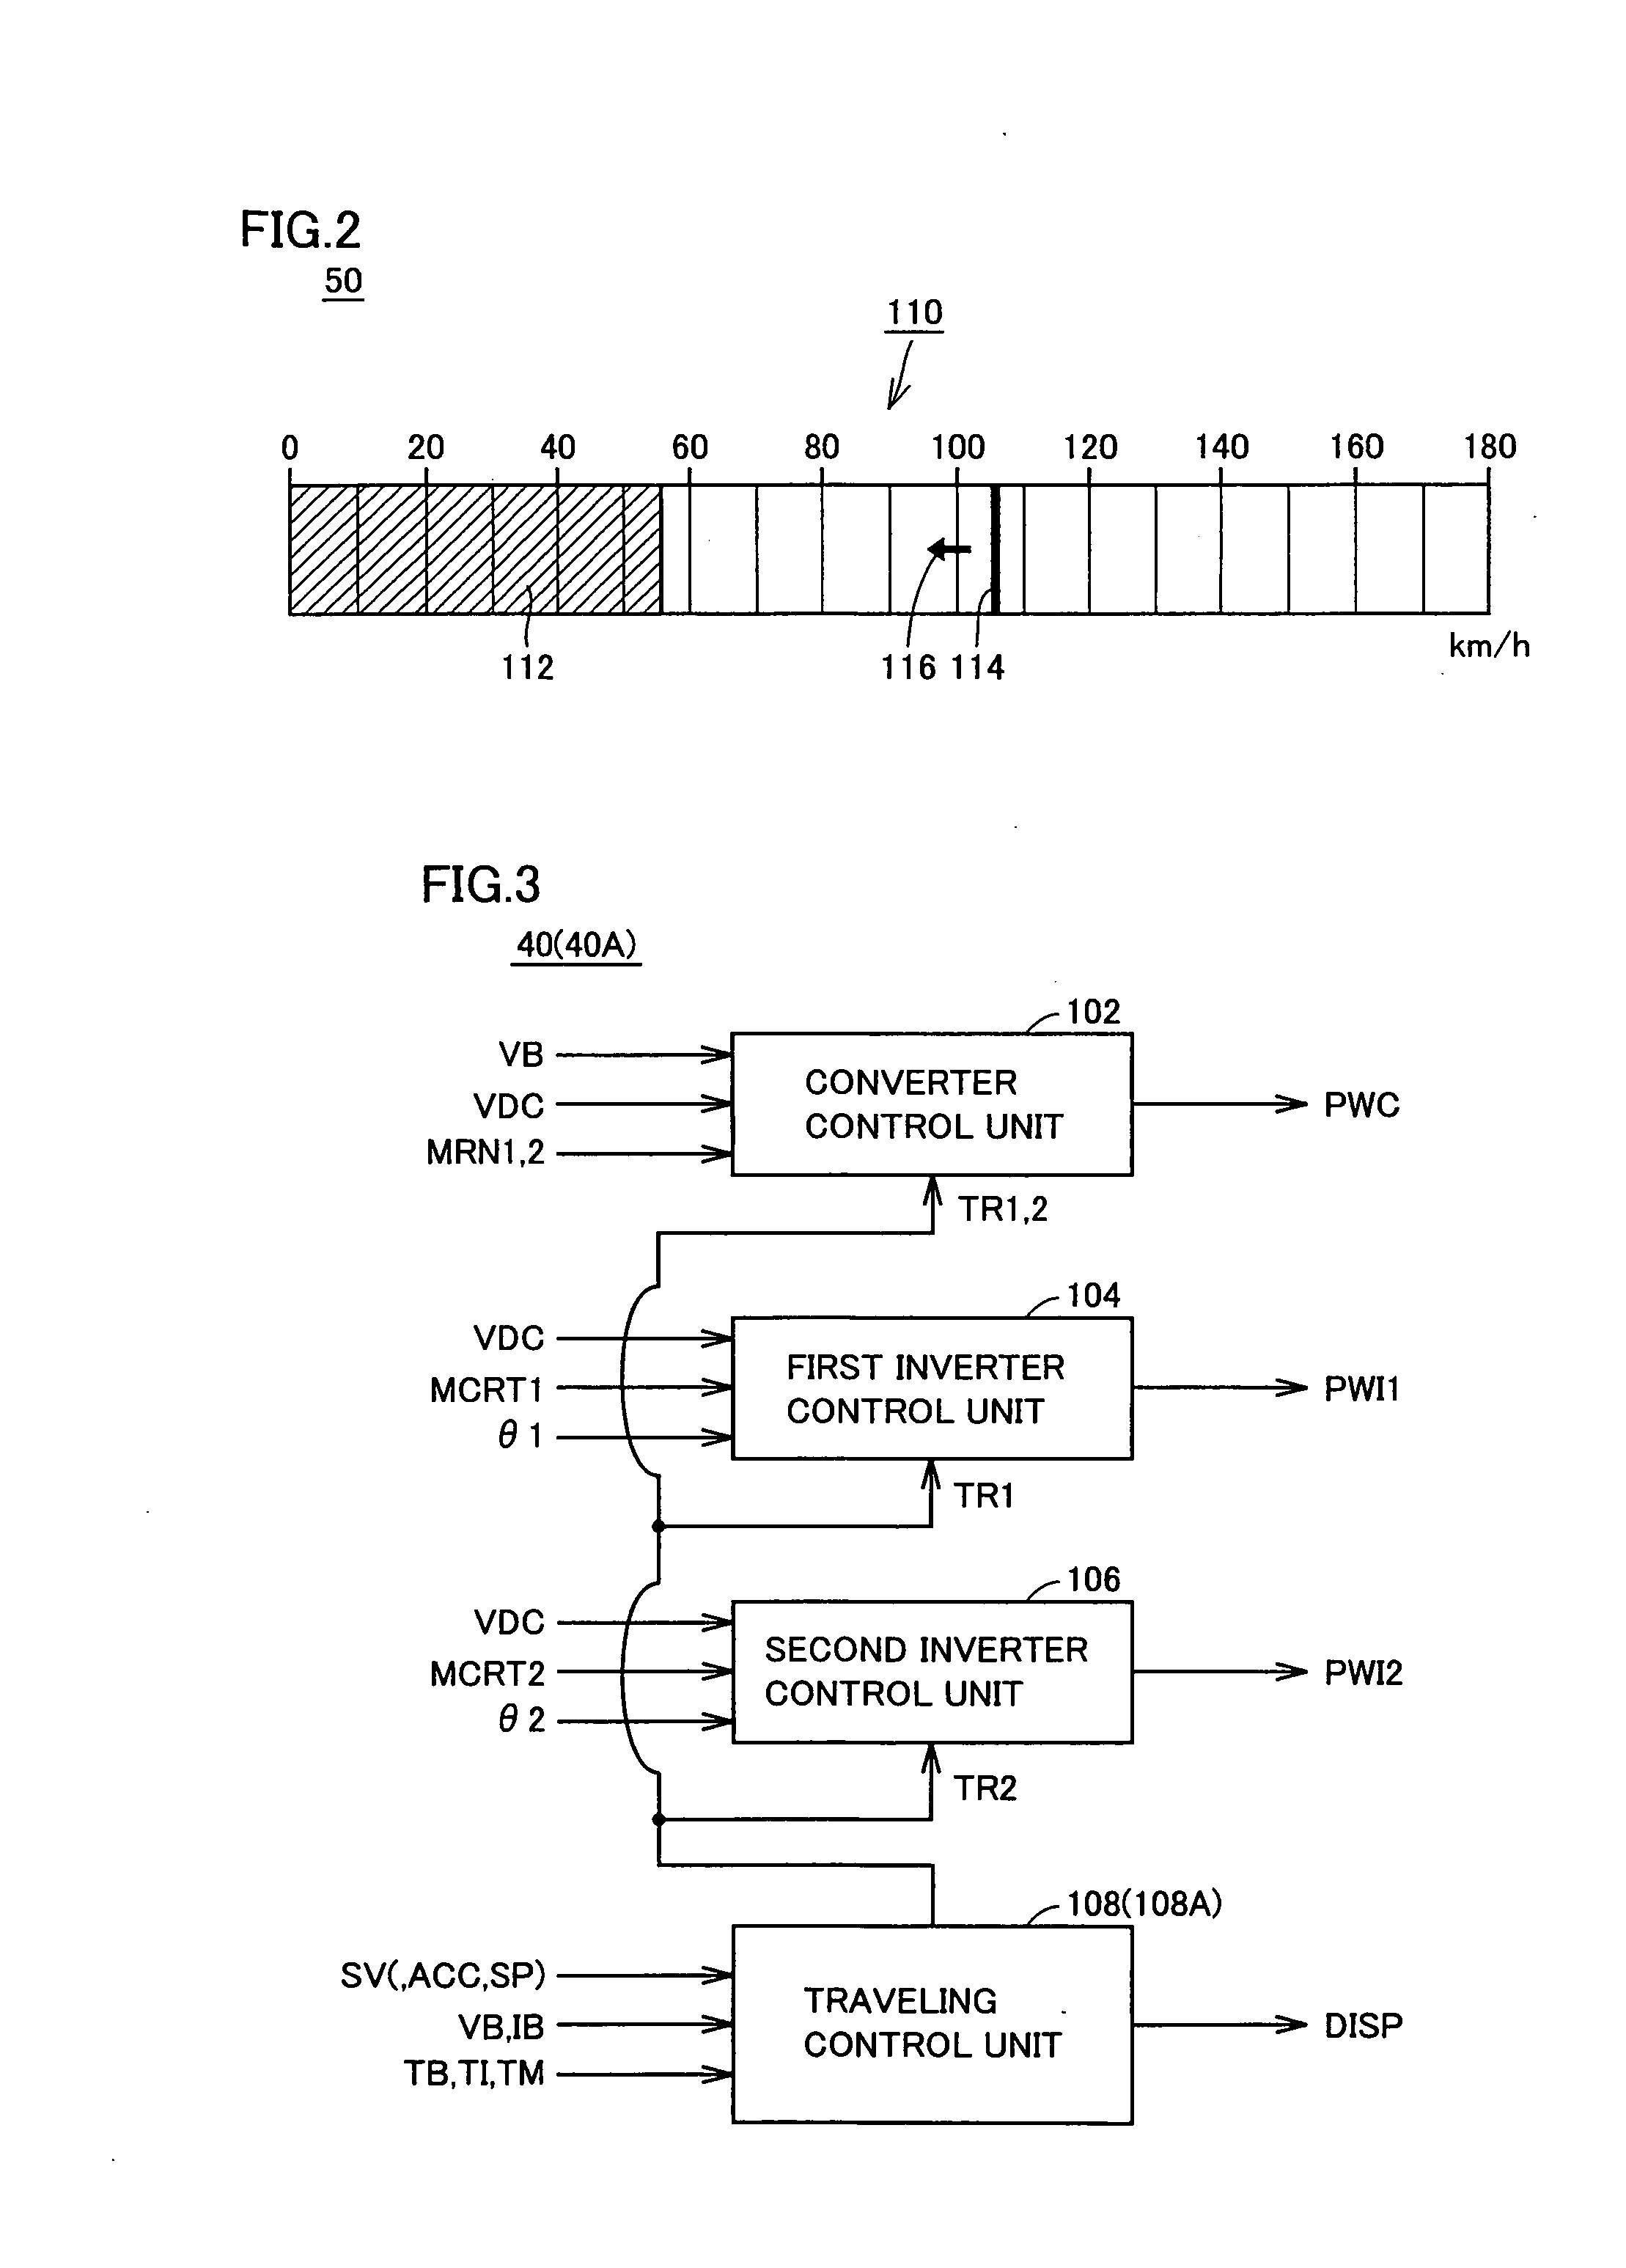 Hybrid vehicle with internal combustion engine and electric motor installed